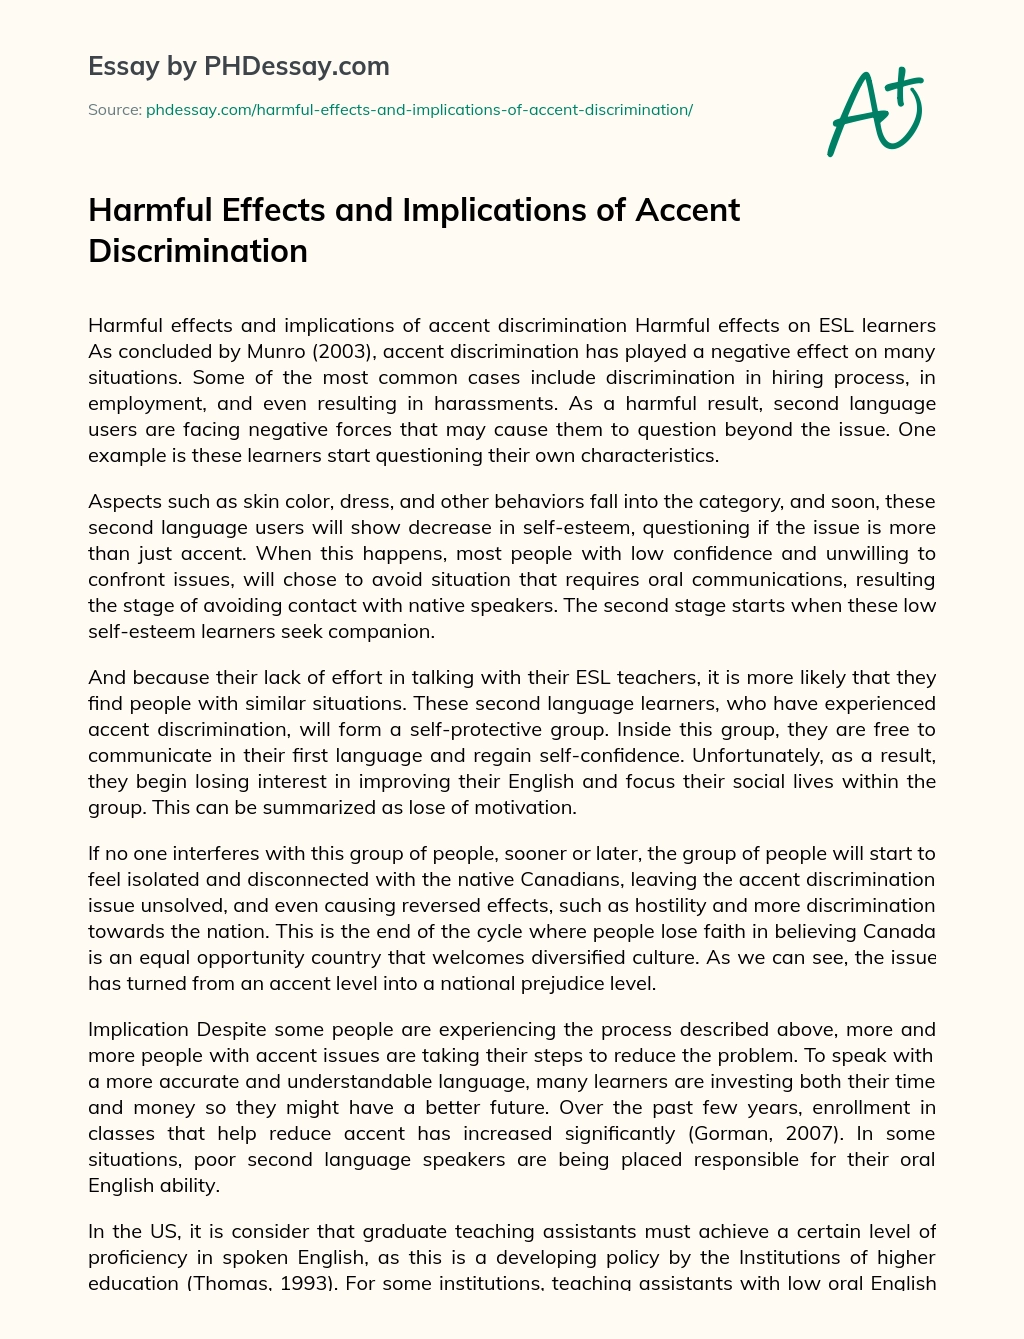 Harmful Effects and Implications of Accent Discrimination essay